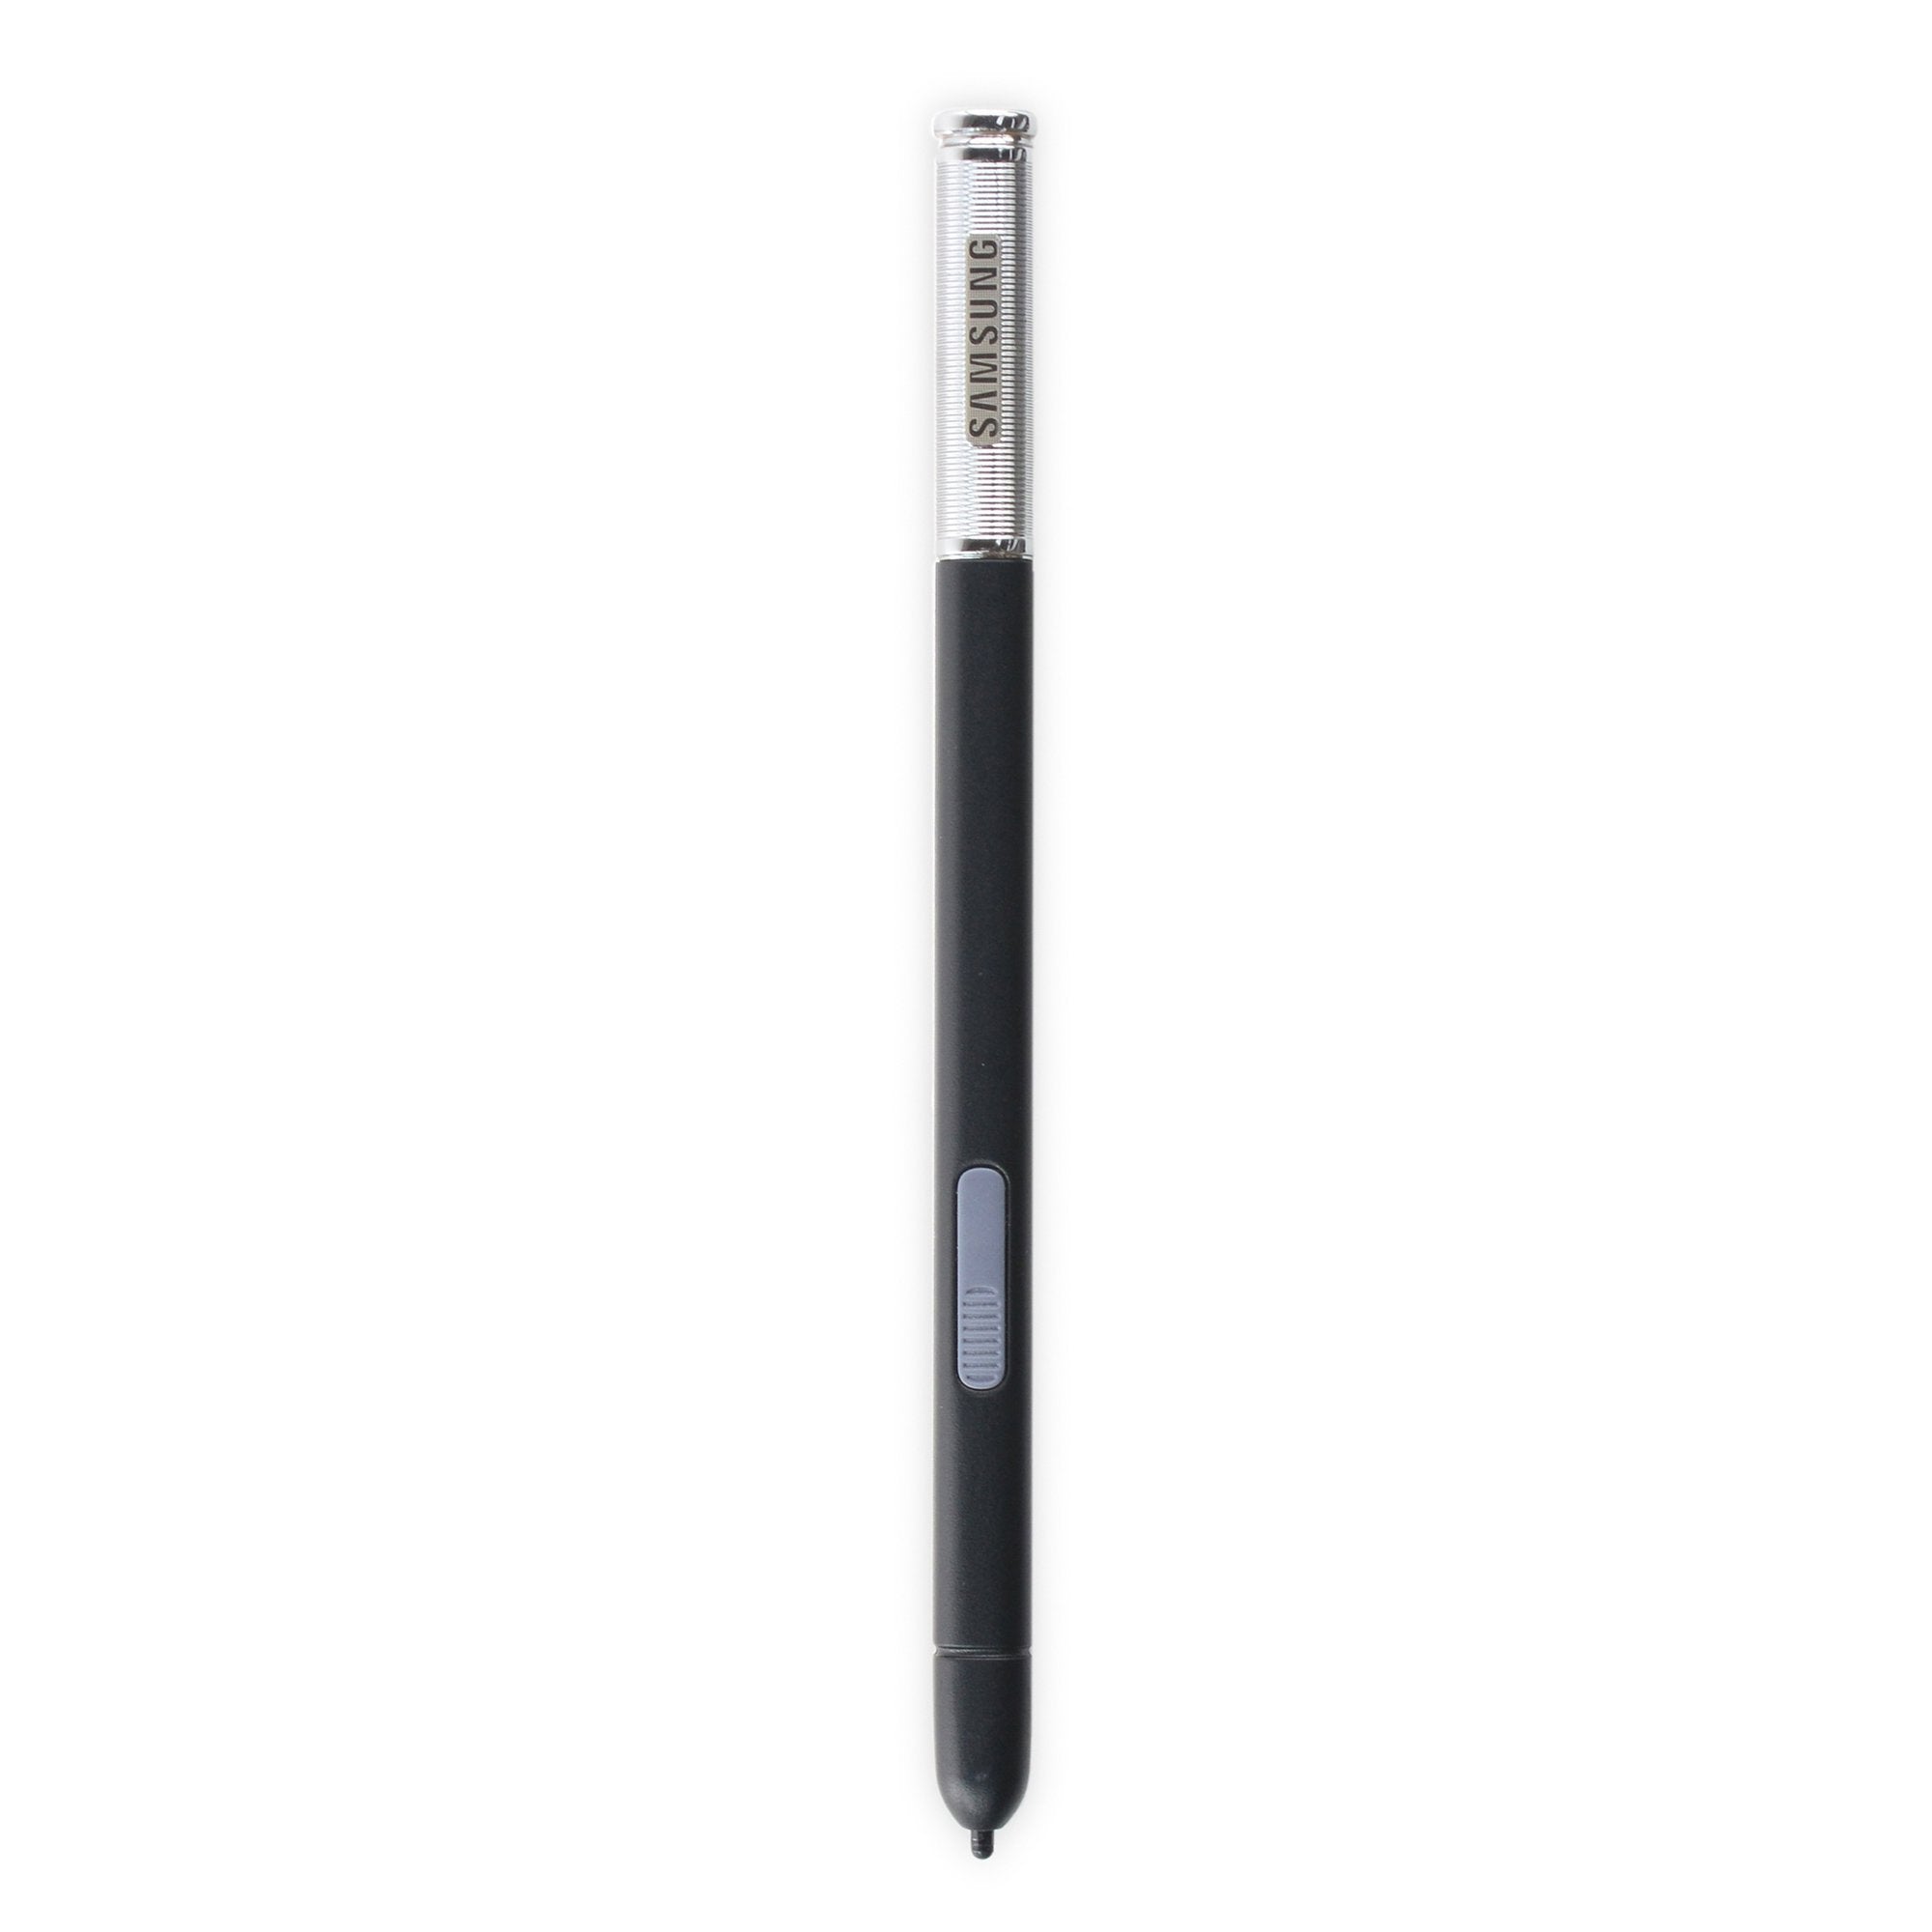 Galaxy Note 10.1 (2014) Pen Black Used, A-Stock